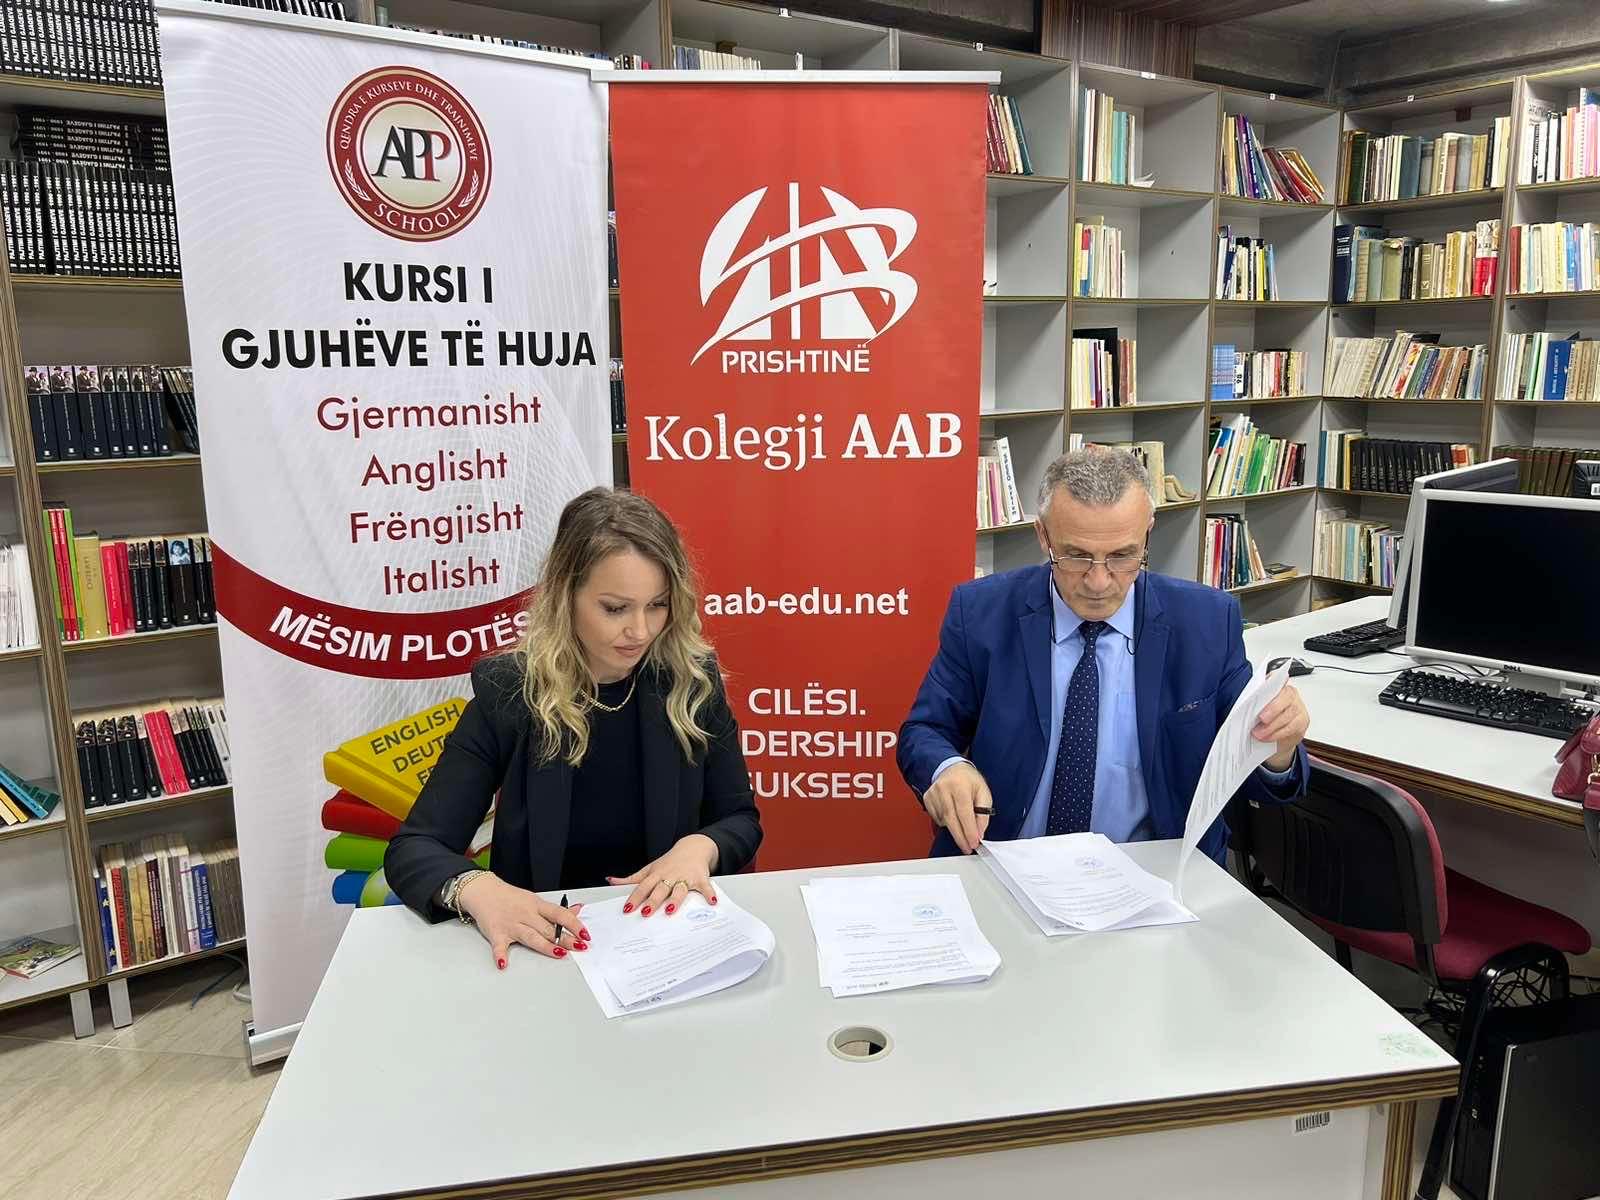 The AAB College branch in Ferizaj signed an agreement with two foreign language schools